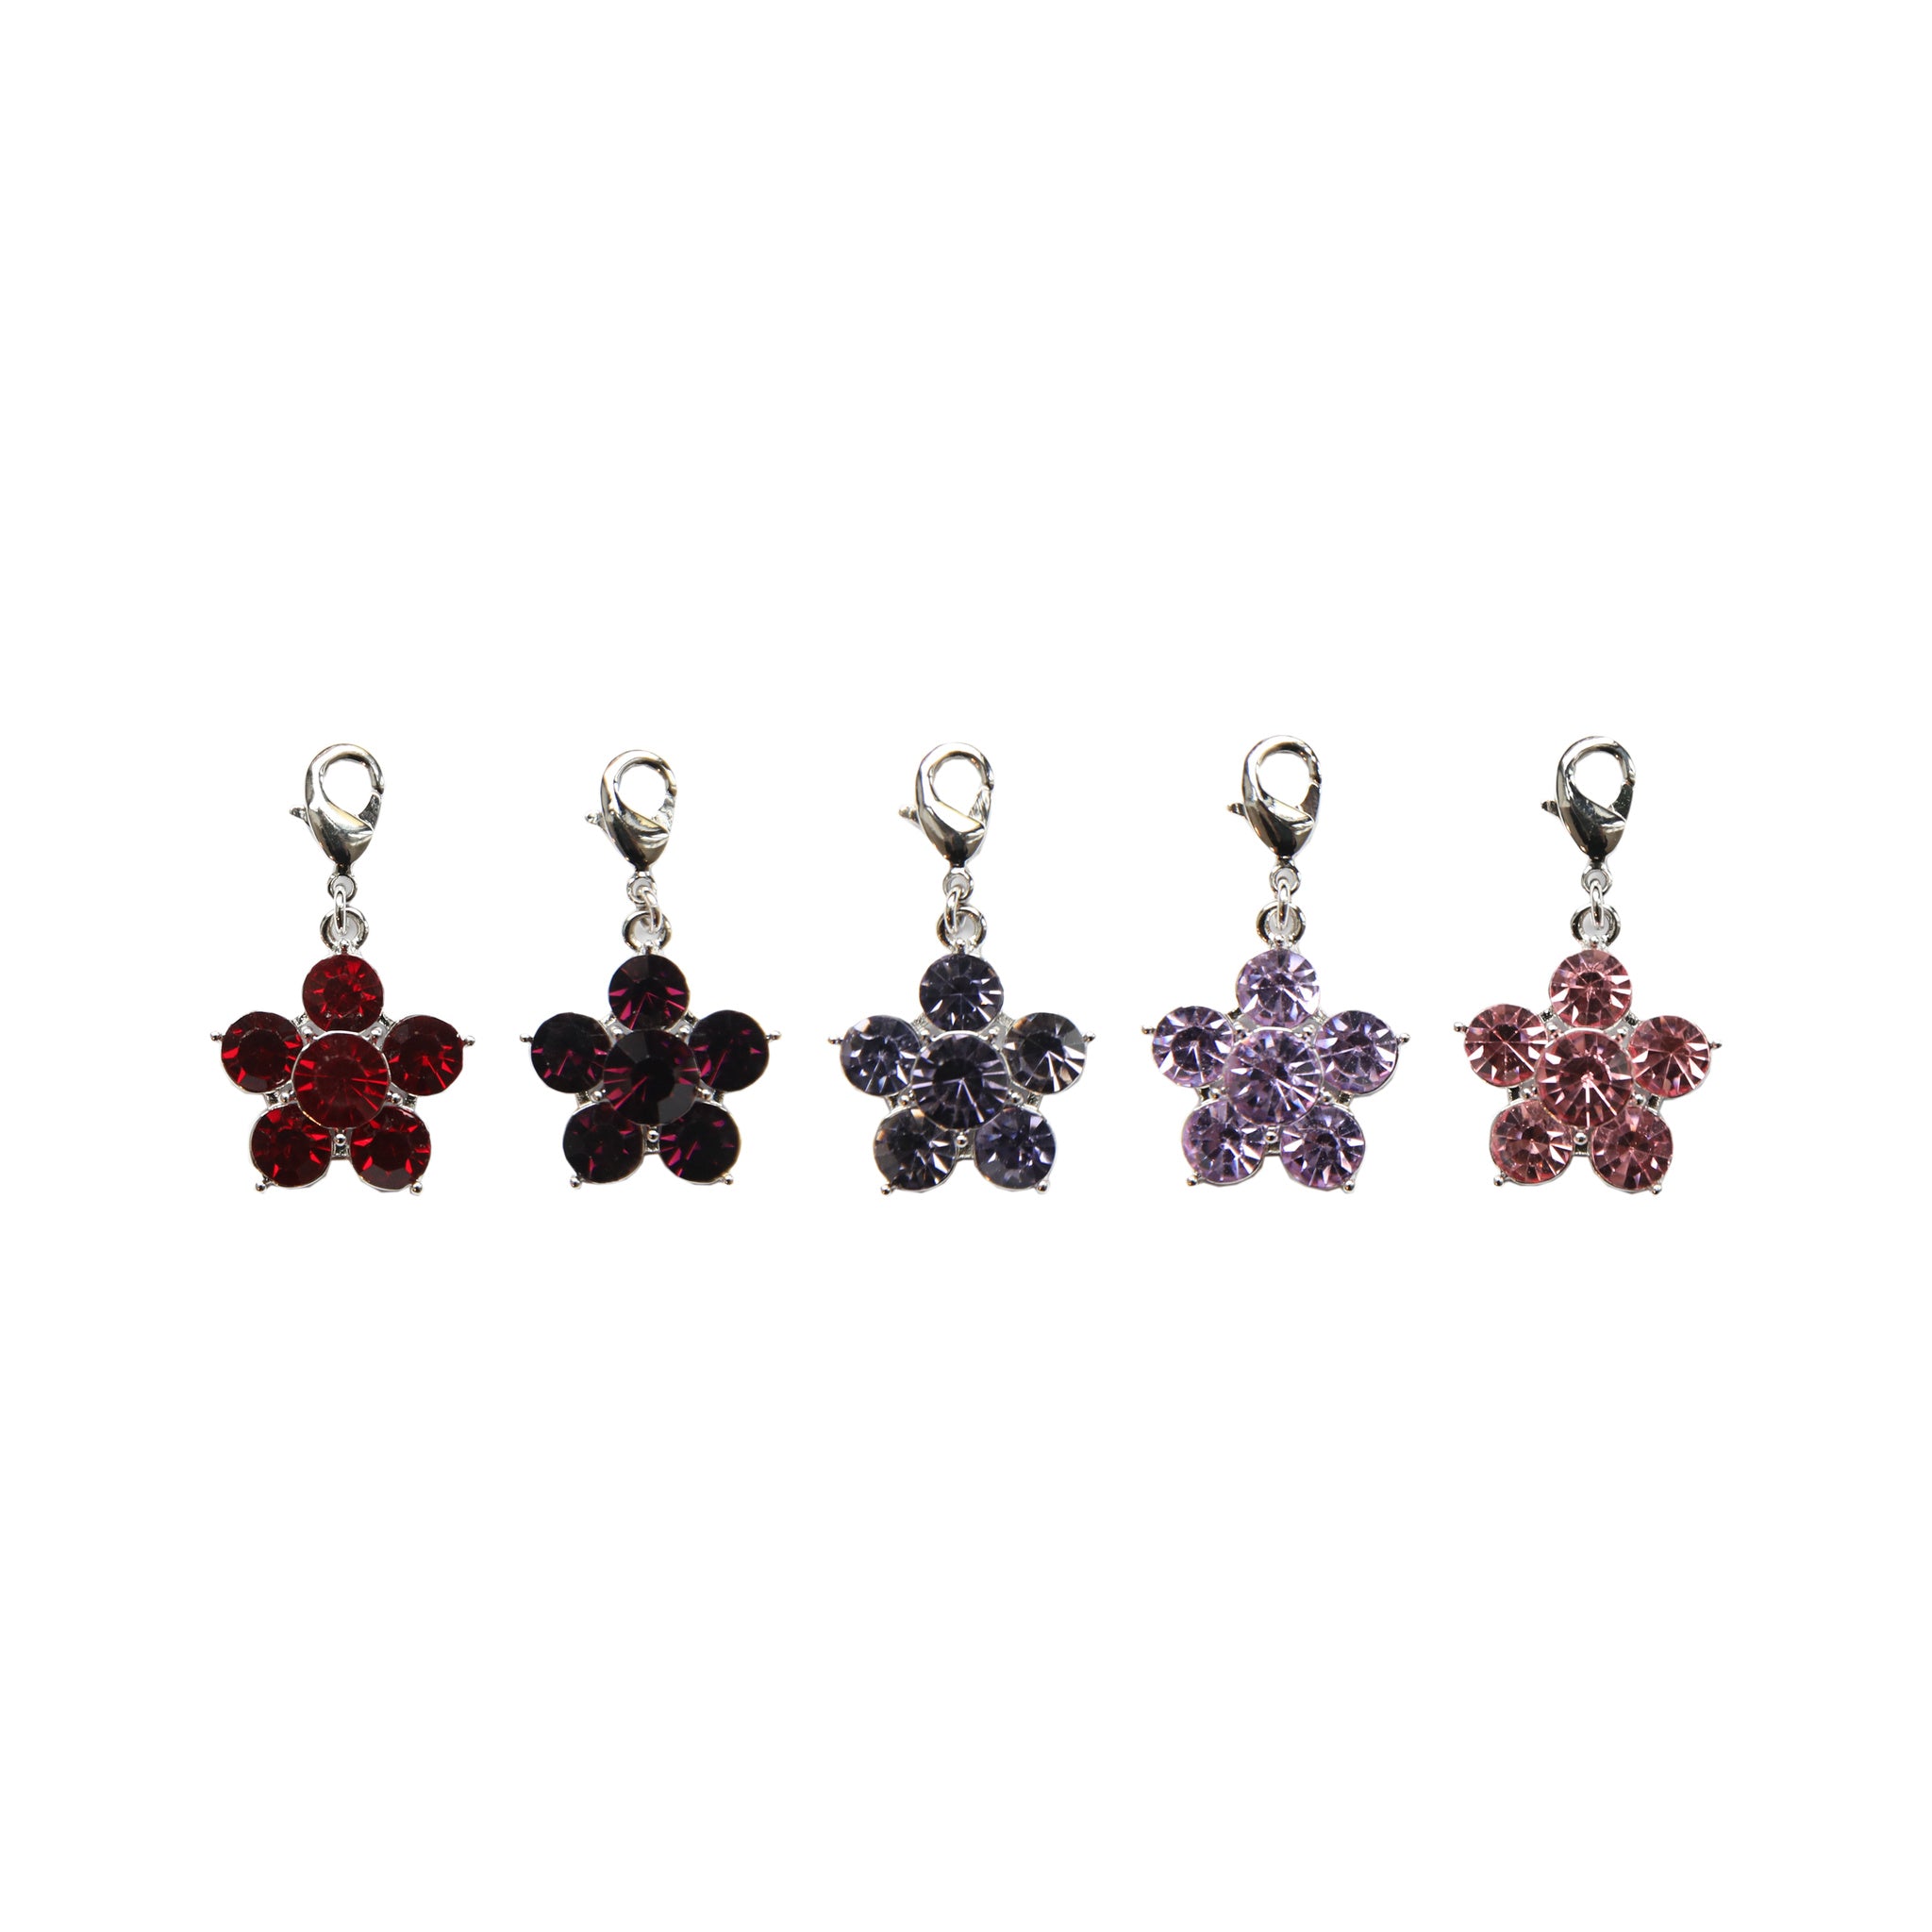 The Kentucky lucky charms in the stunning flower shape. Available in lots of colours and perfect for your bracelets, attaching to your bridle or fly veil for a little sparkle, or just keeping somewhere safe for good luck.